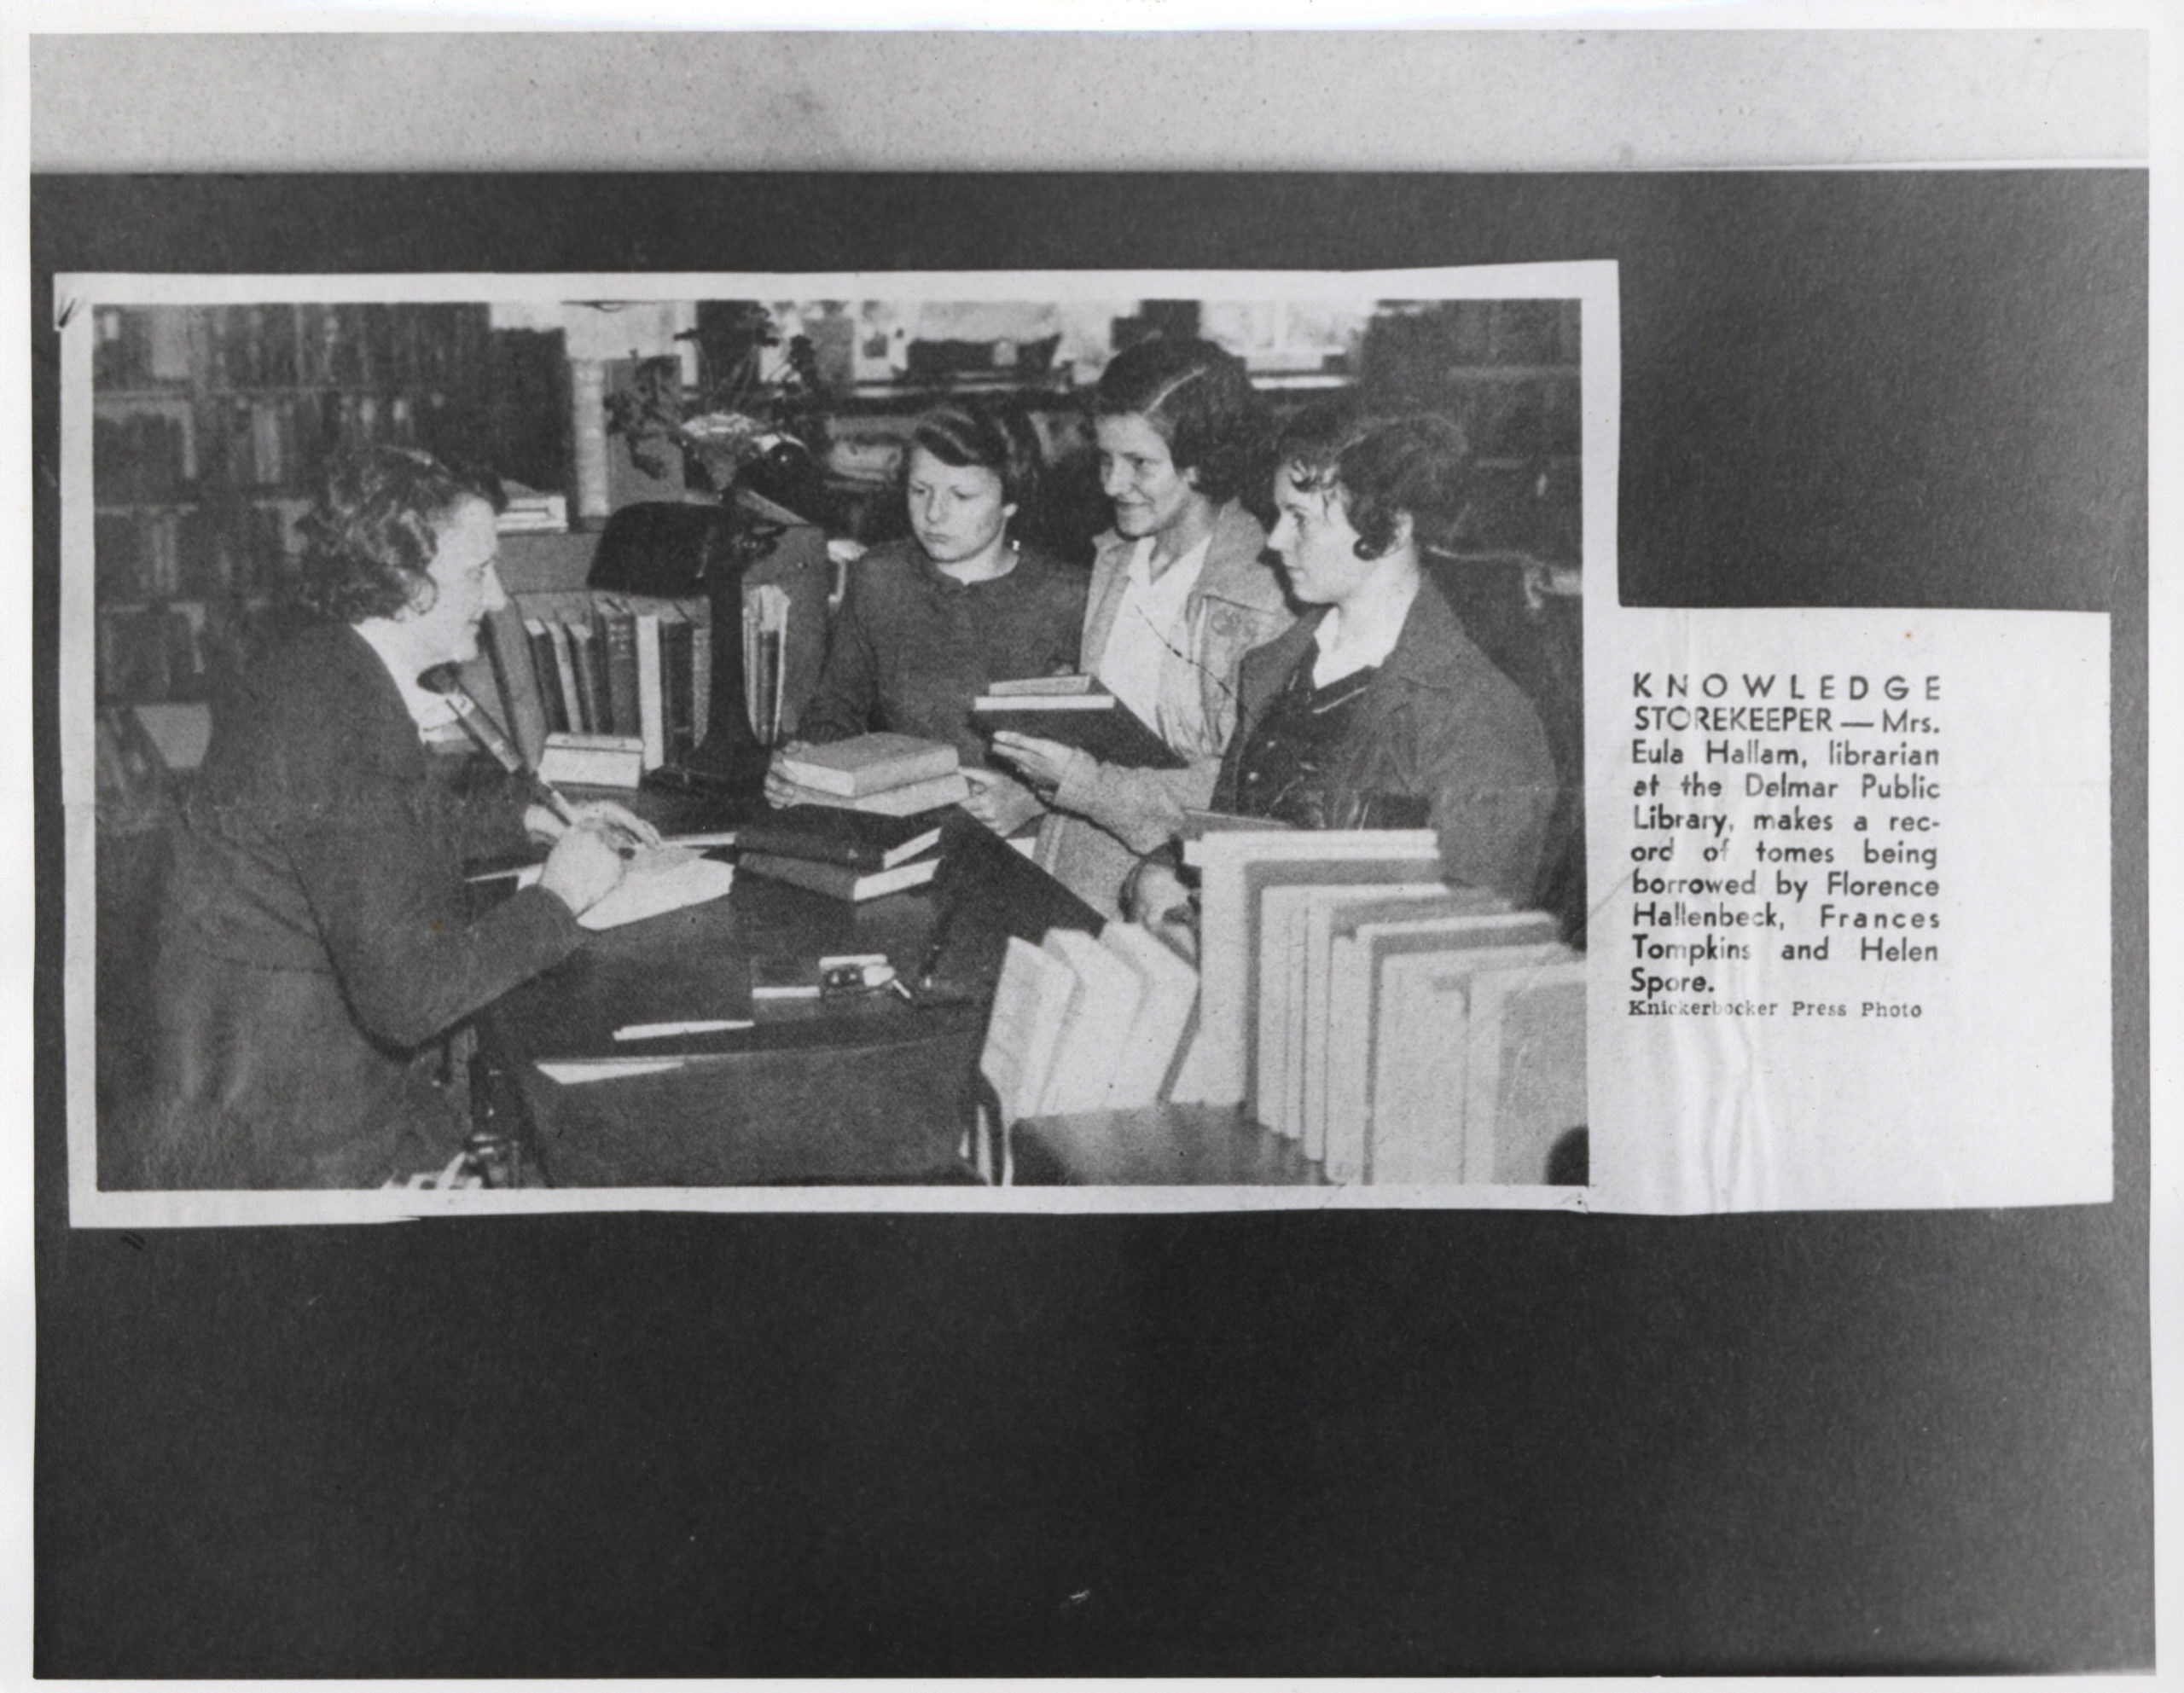 Delmar Public Library’s first “official” librarian Eula Hallam, c. 1933 (Bethlehem Public Library archives)